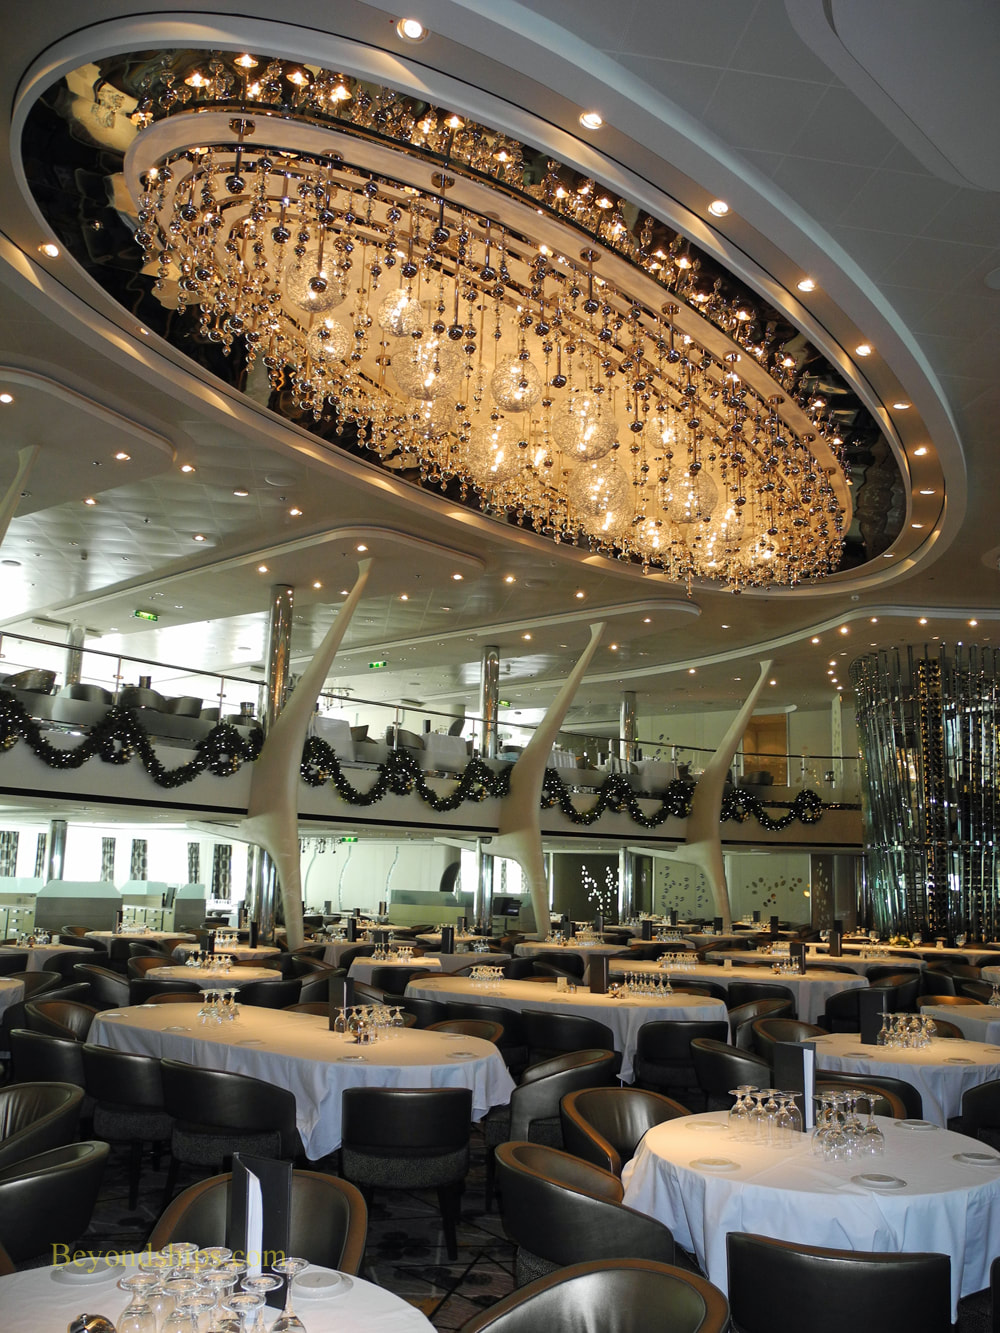 Celebrity Reflection main dining room